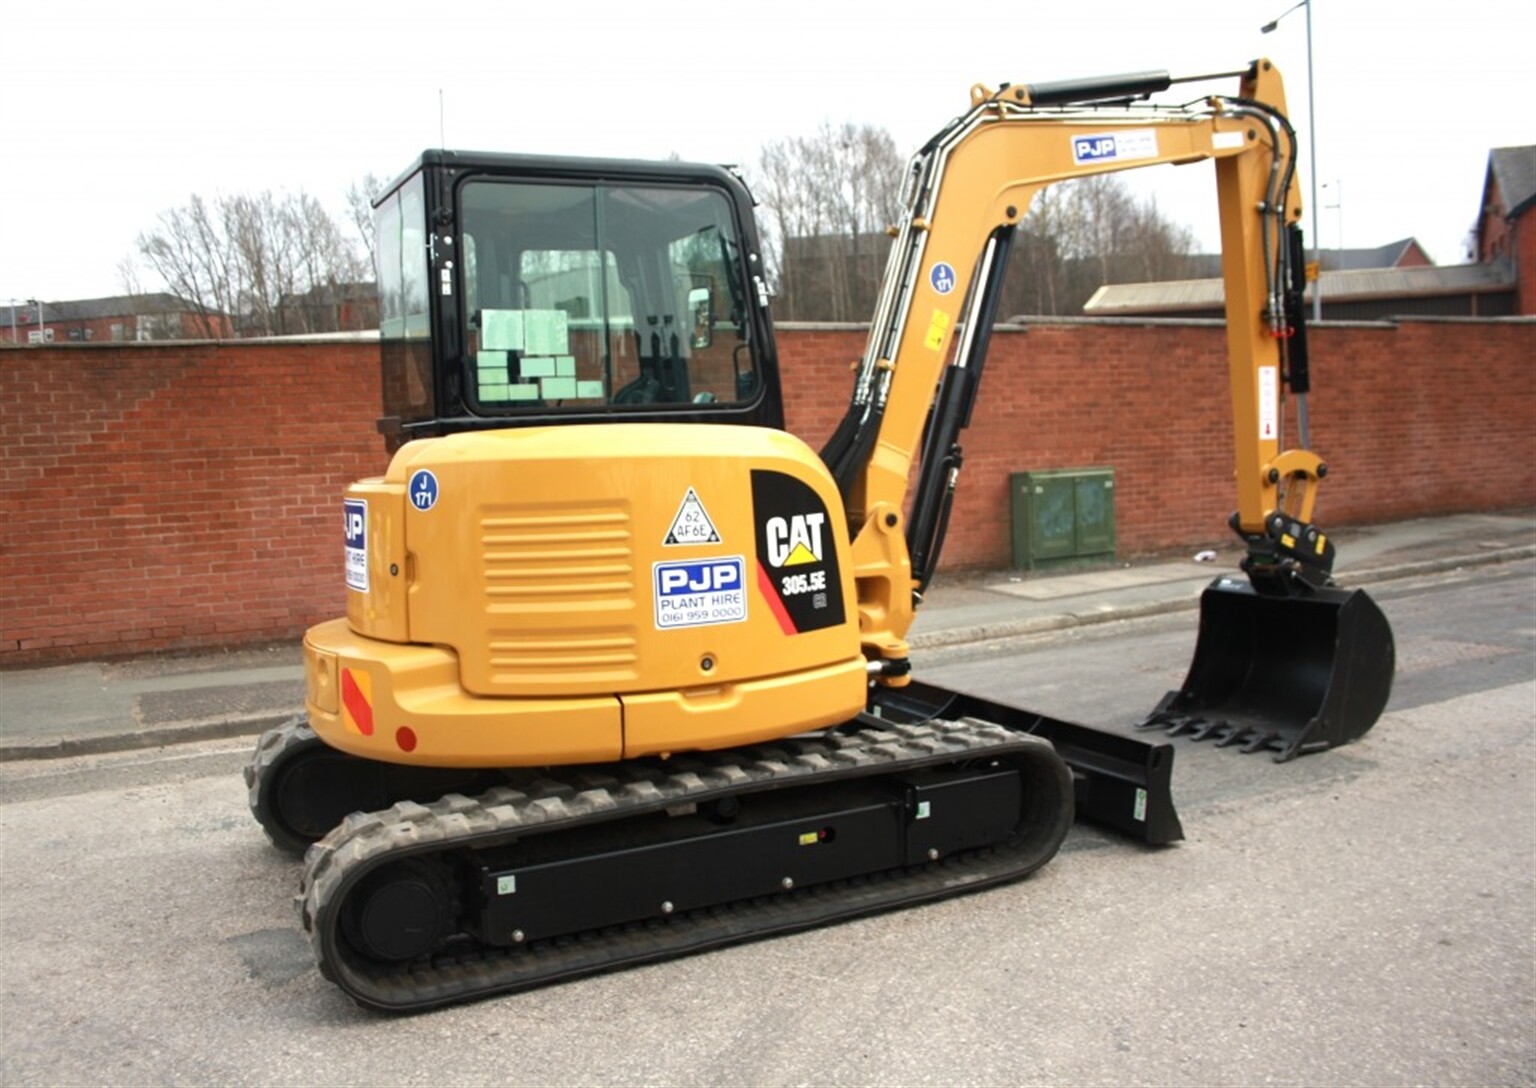 PJP Plant Hire opt for Cat’s latest 5 tonner